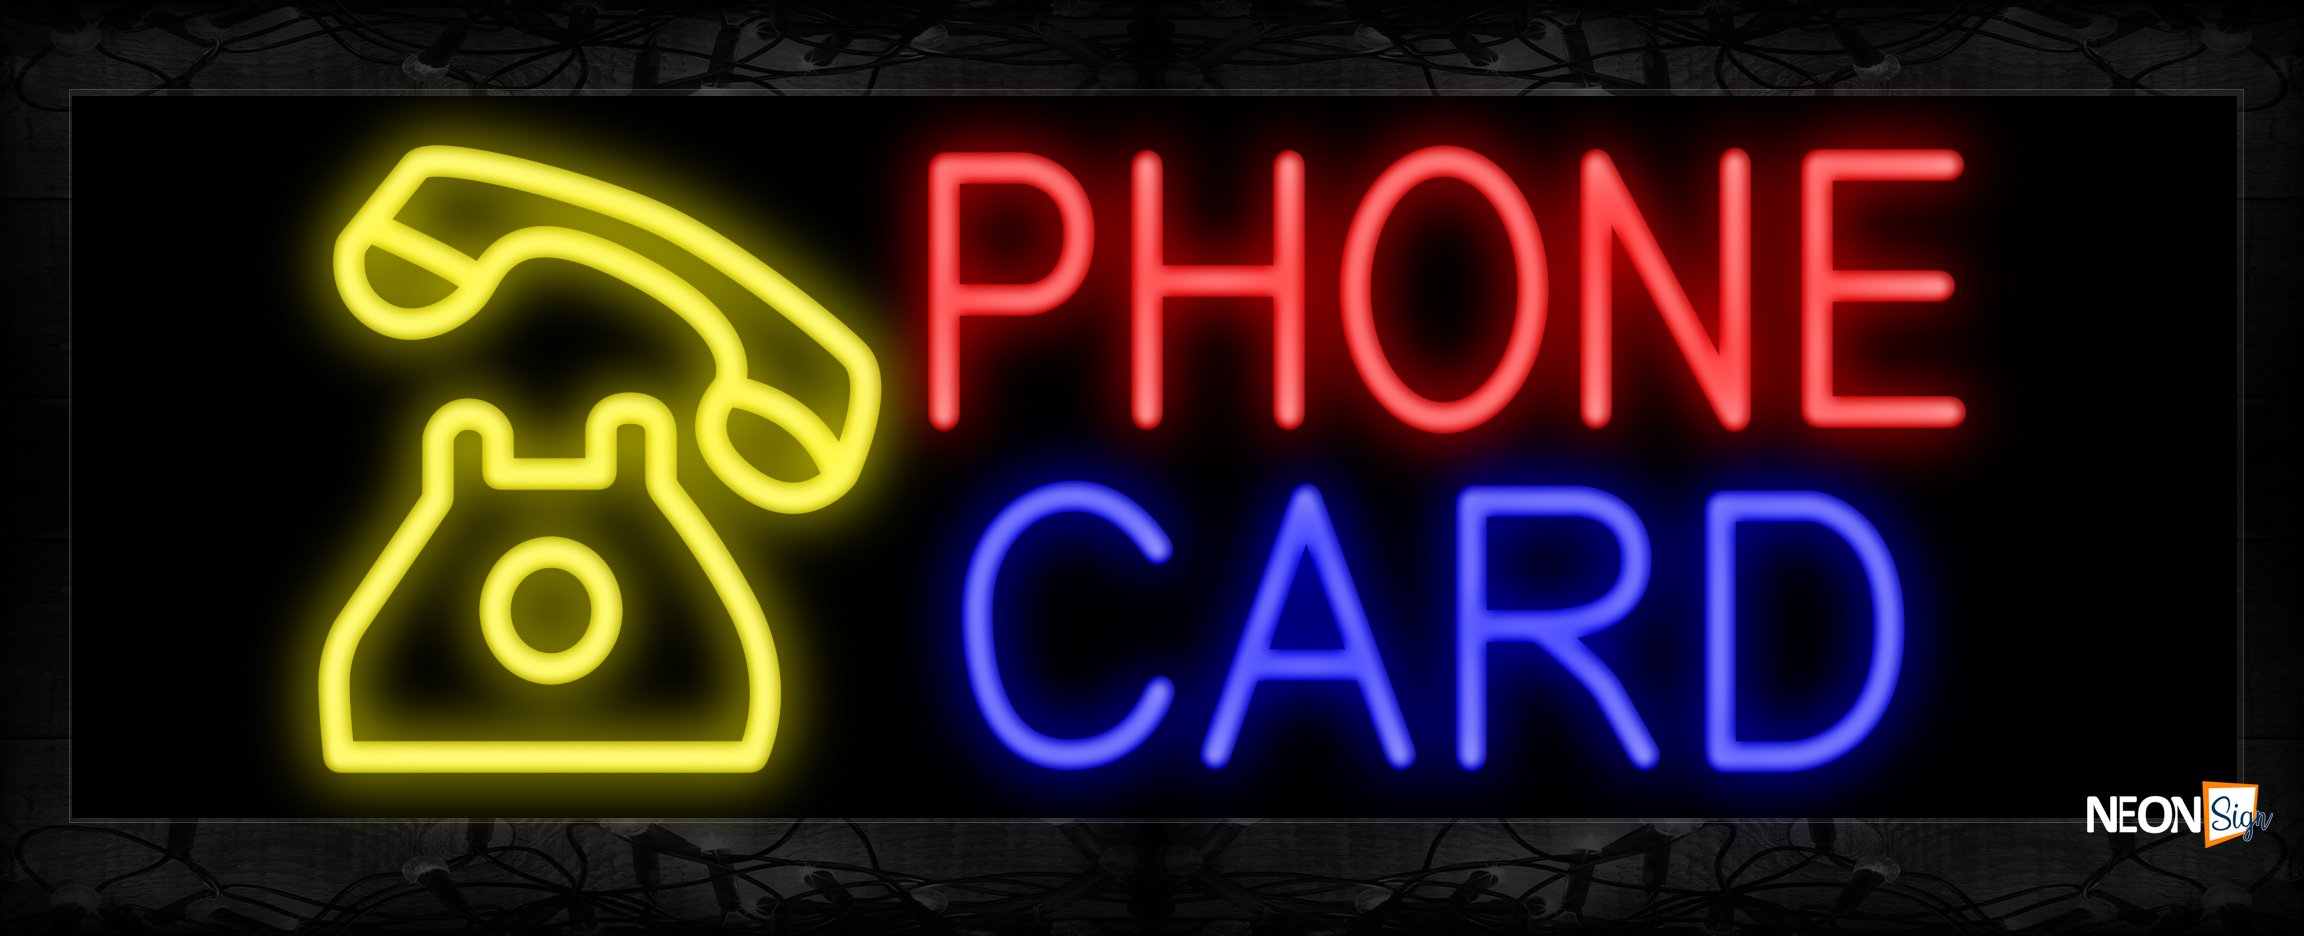 Image of 10491 Phone Card with telephone logo Neon Sign 13x32 Black Backing